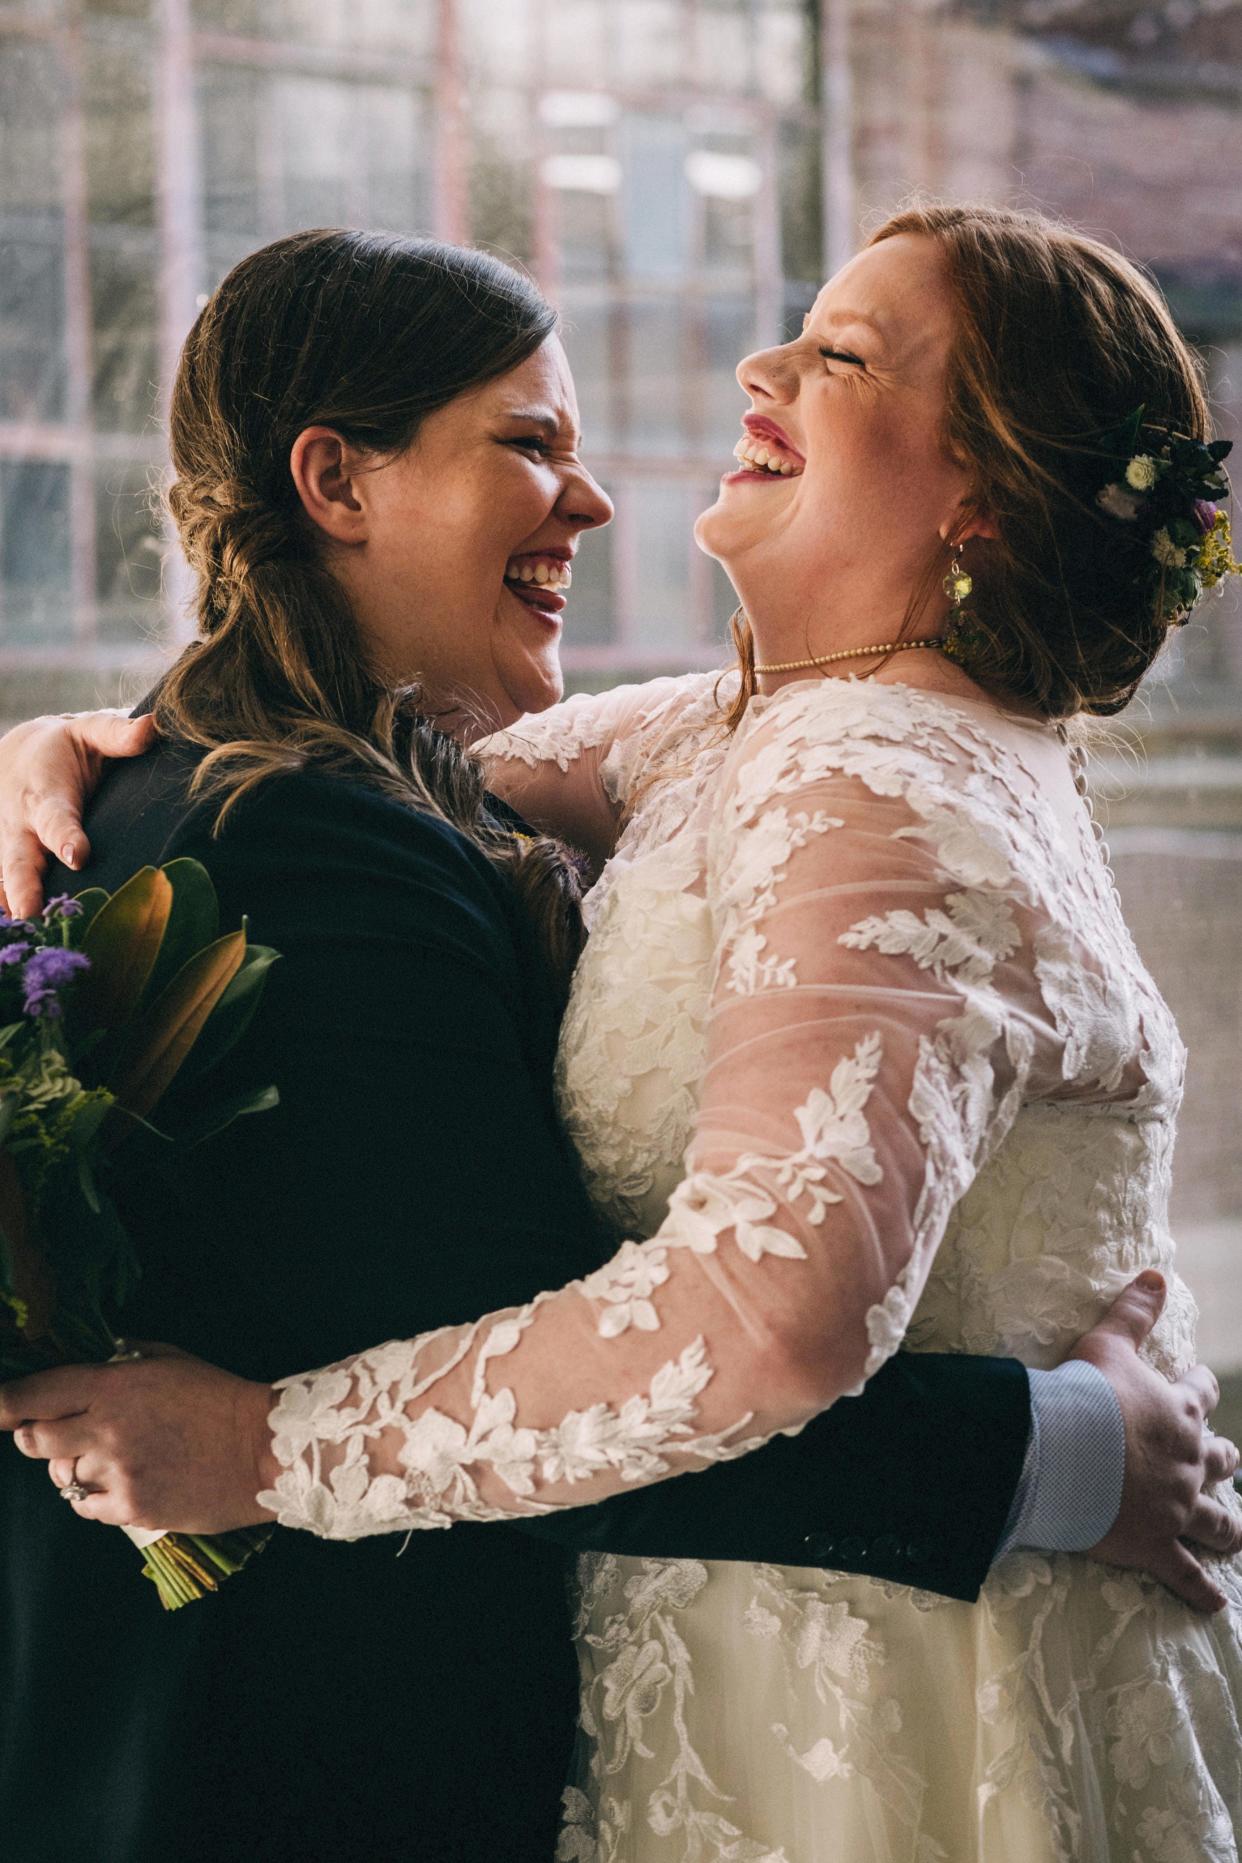 This photo by Sarah Katherine Davis was taken at Mellwood Art Center. Both businesses are members of Inclusive Kentucky Weddings. 

“We have ALWAYS been an LGBTQ-friendly community at Mellwood, now in our 12th year of business. We have had many commitment ceremonies in the past and now weddings between LGBTQ+ couples,” Mellwood Art Center says in its member statement.